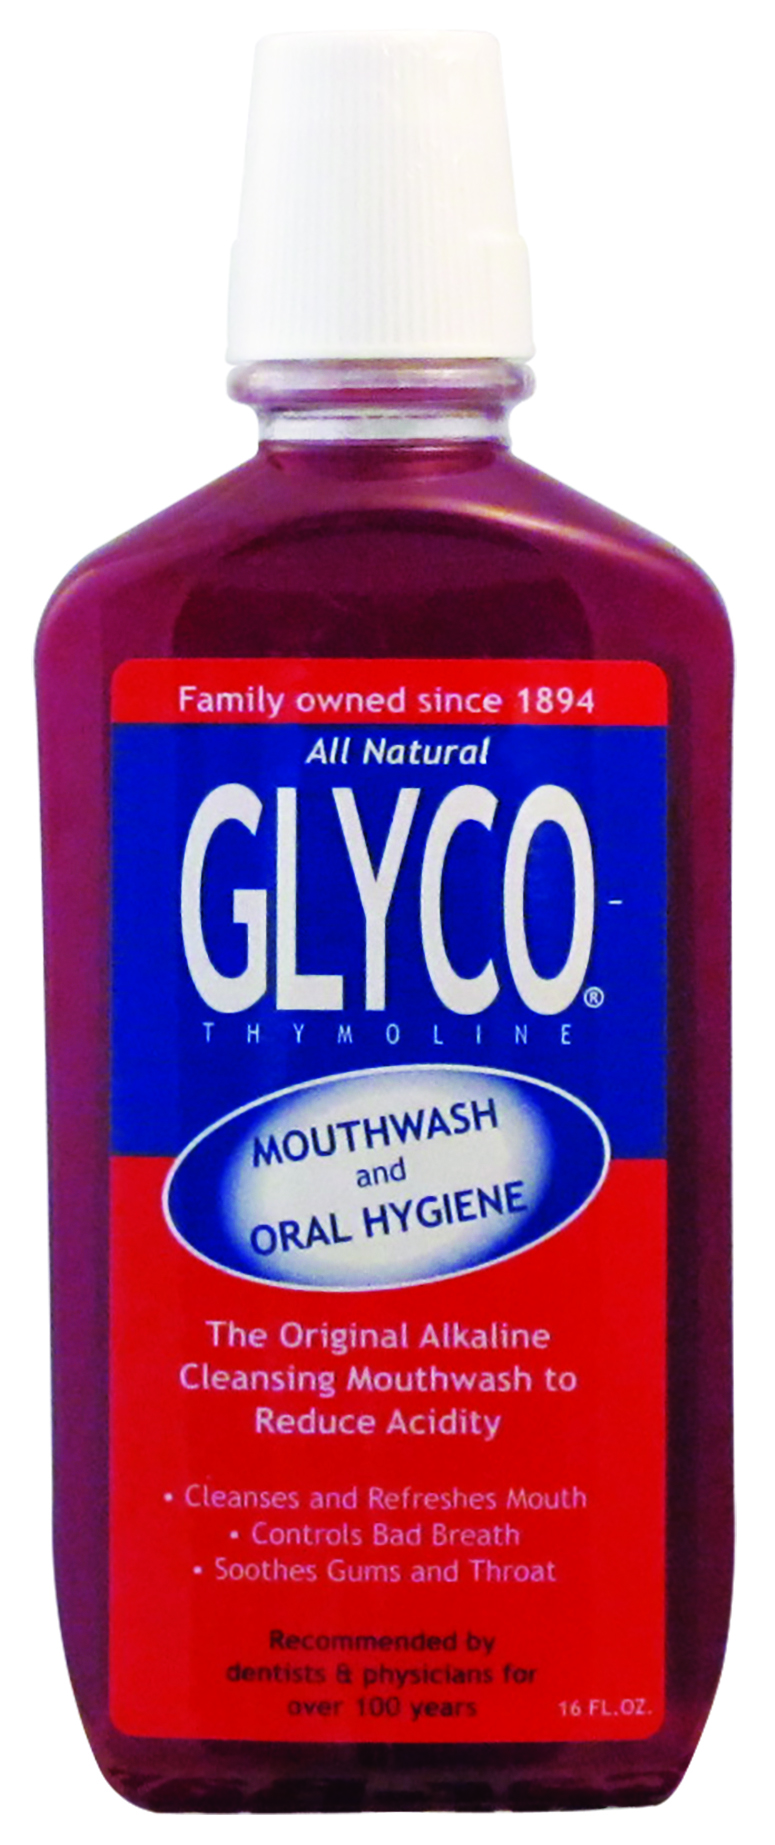 Glyco-Thylomine for Men's and Women's Health